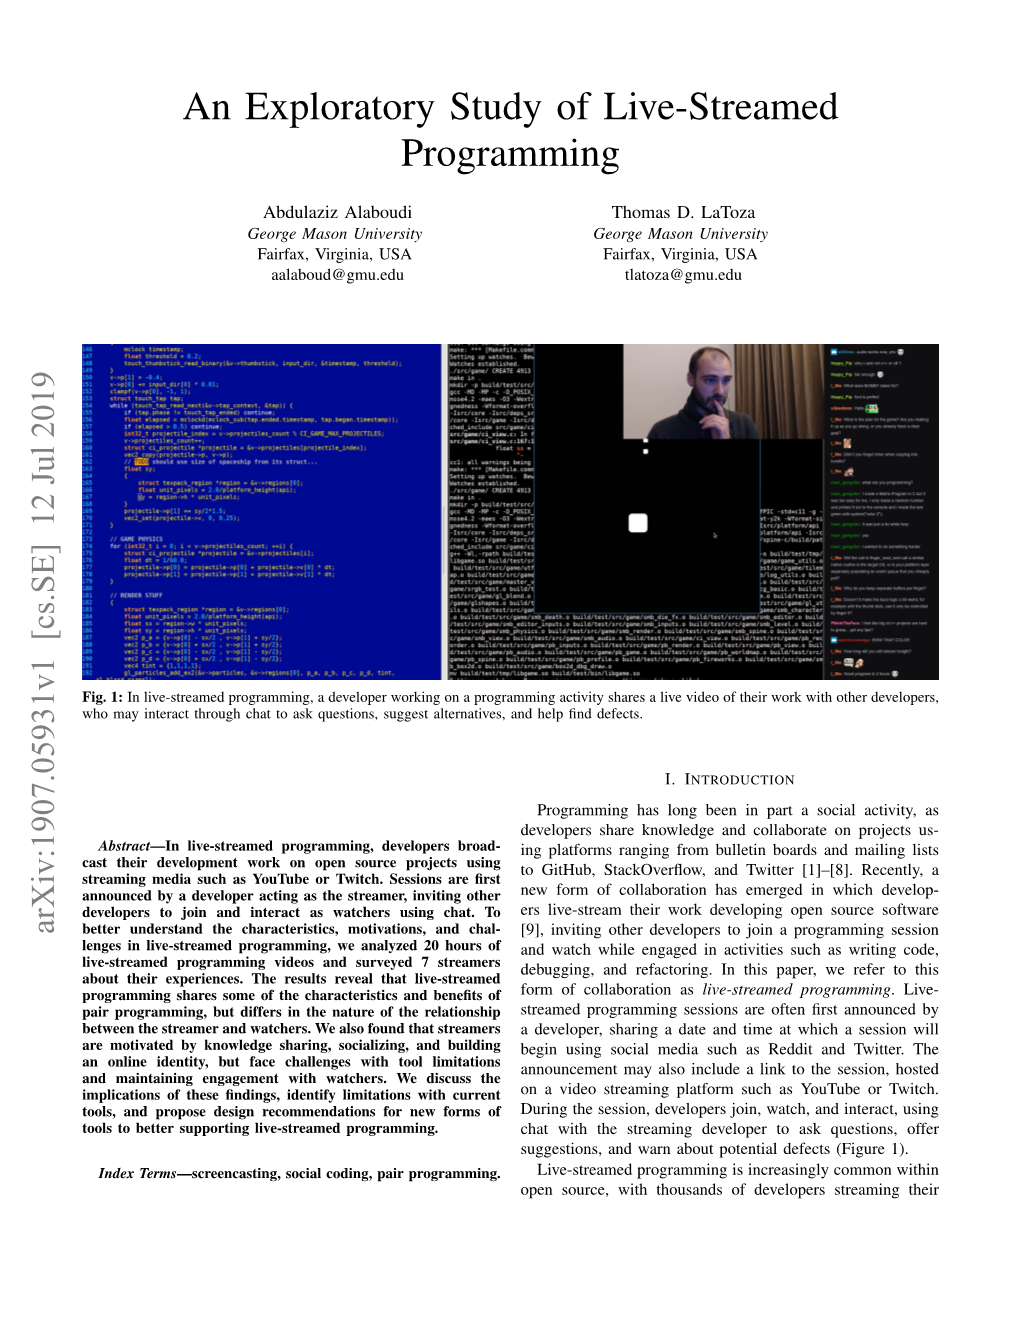 An Exploratory Study of Live-Streamed Programming